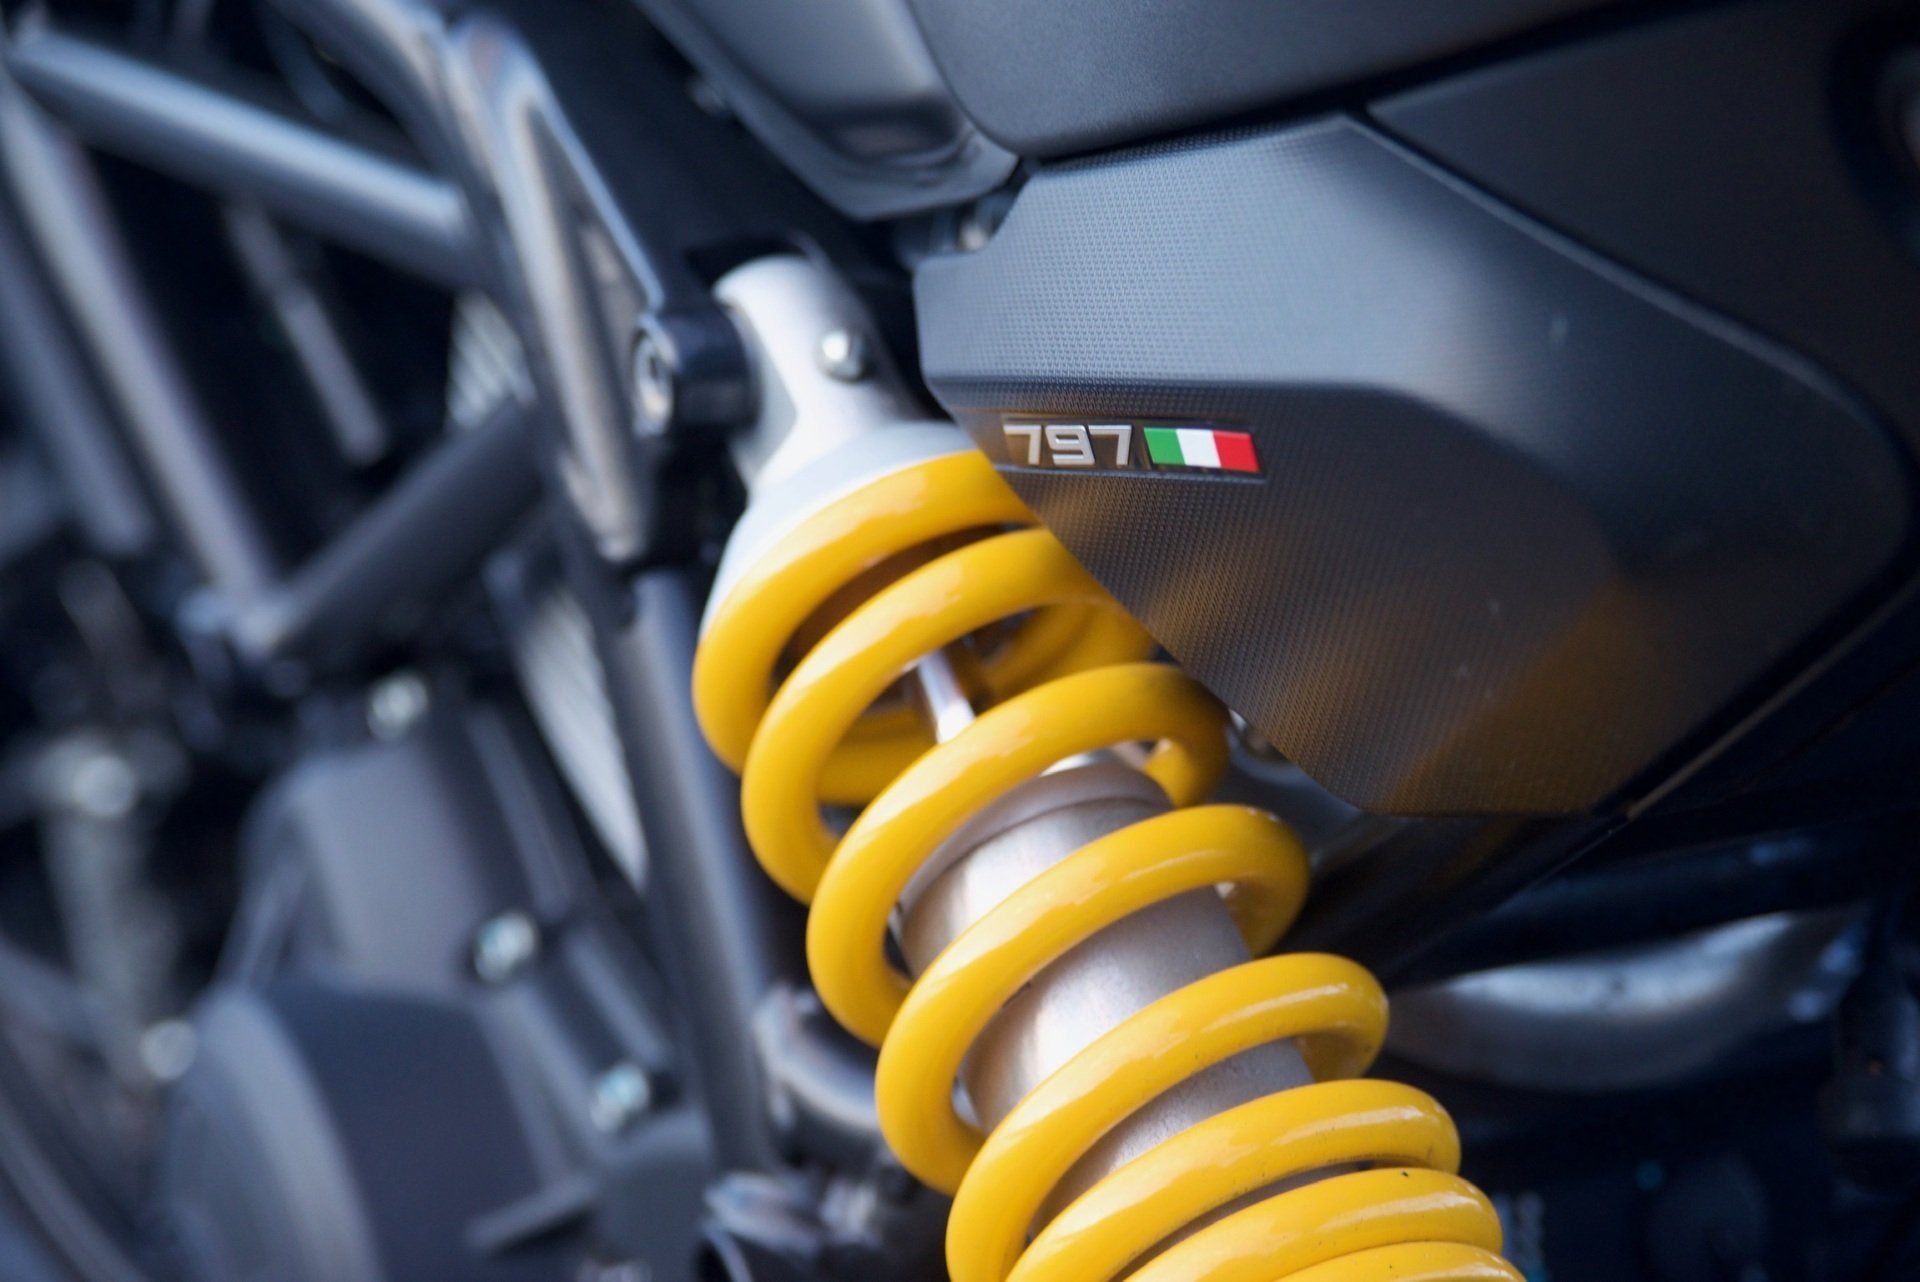 A close up of a yellow shock absorber on a motorcycle